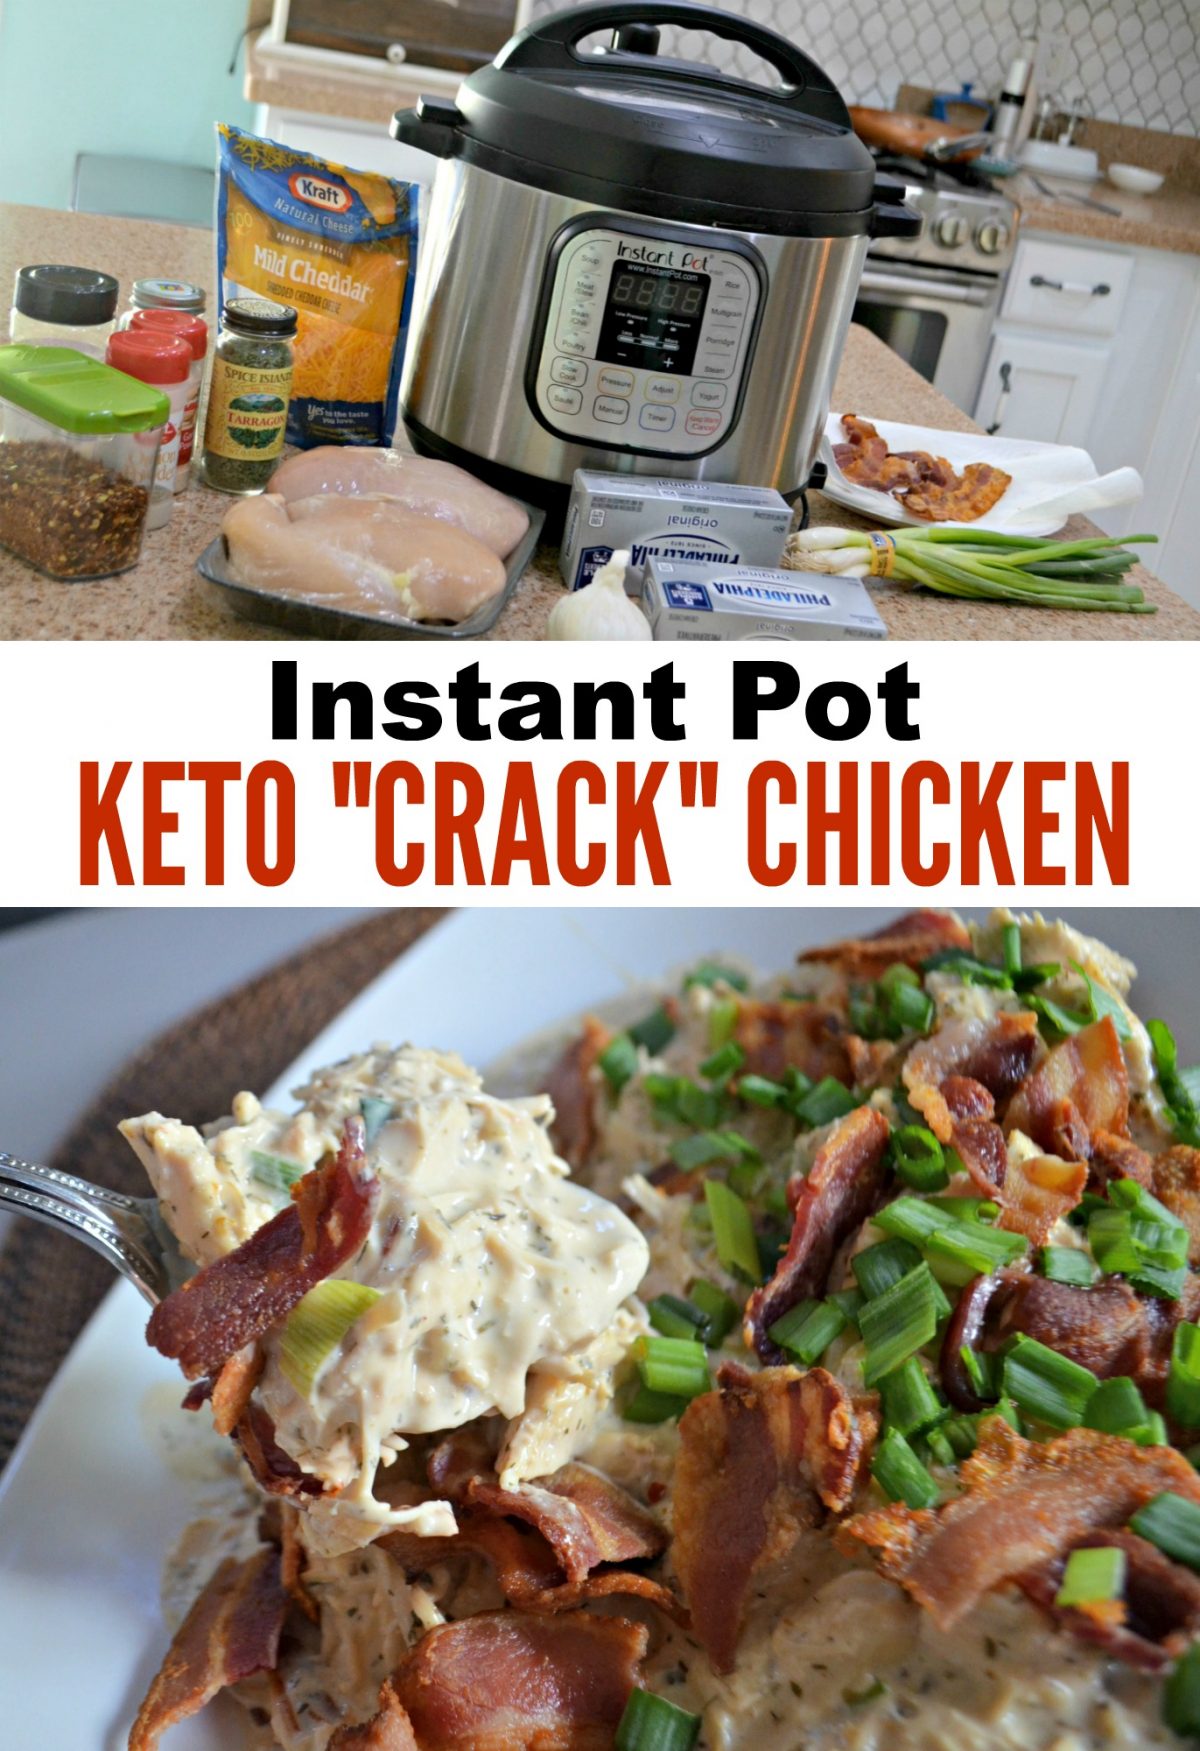 Easy Keto Crack Chicken Recipe - Use the Instant Pot or Slow Cooker!